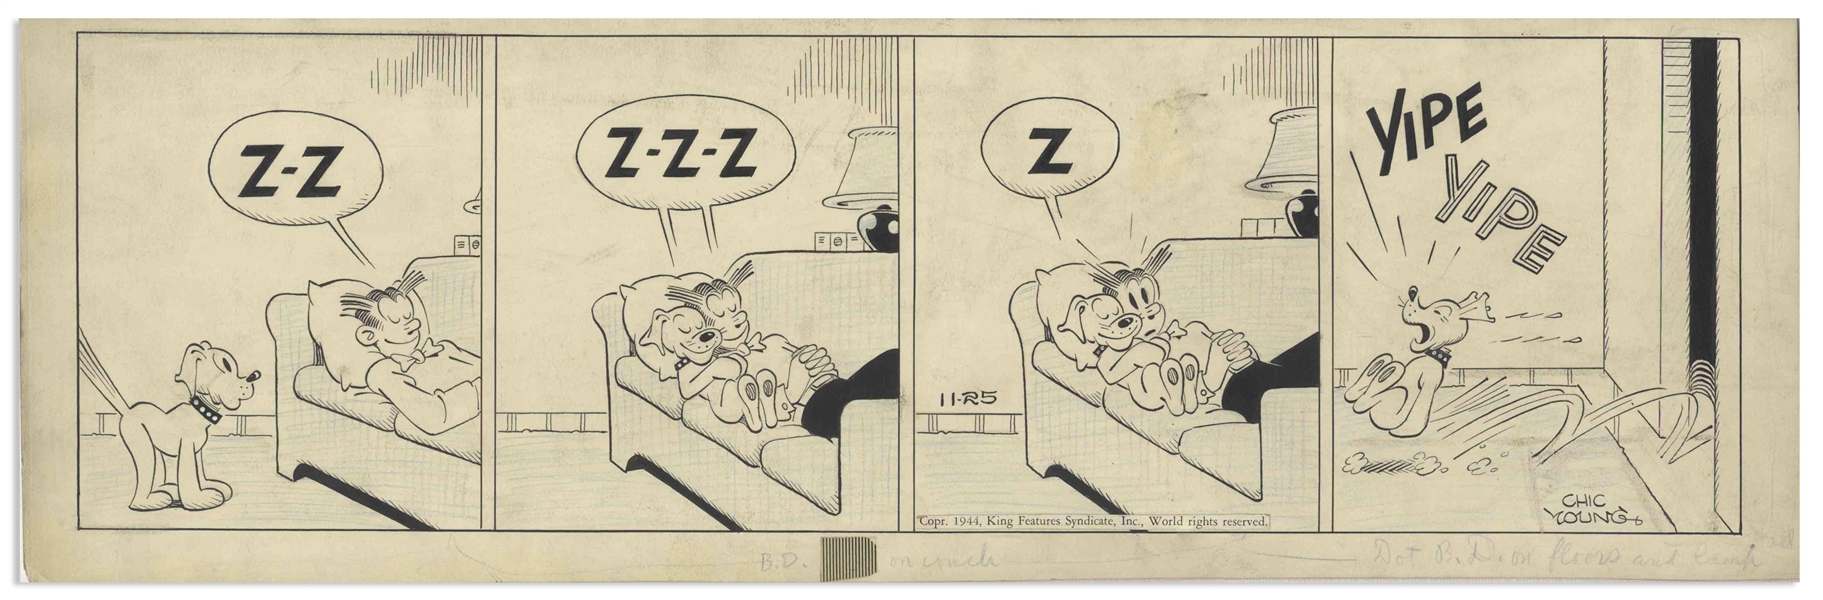 Chic Young Hand-Drawn ''Blondie'' Comic Strip From 1944 Titled ''Sofa Solo!'' -- Daisy Tries to Sneak a Nap with Dagwood